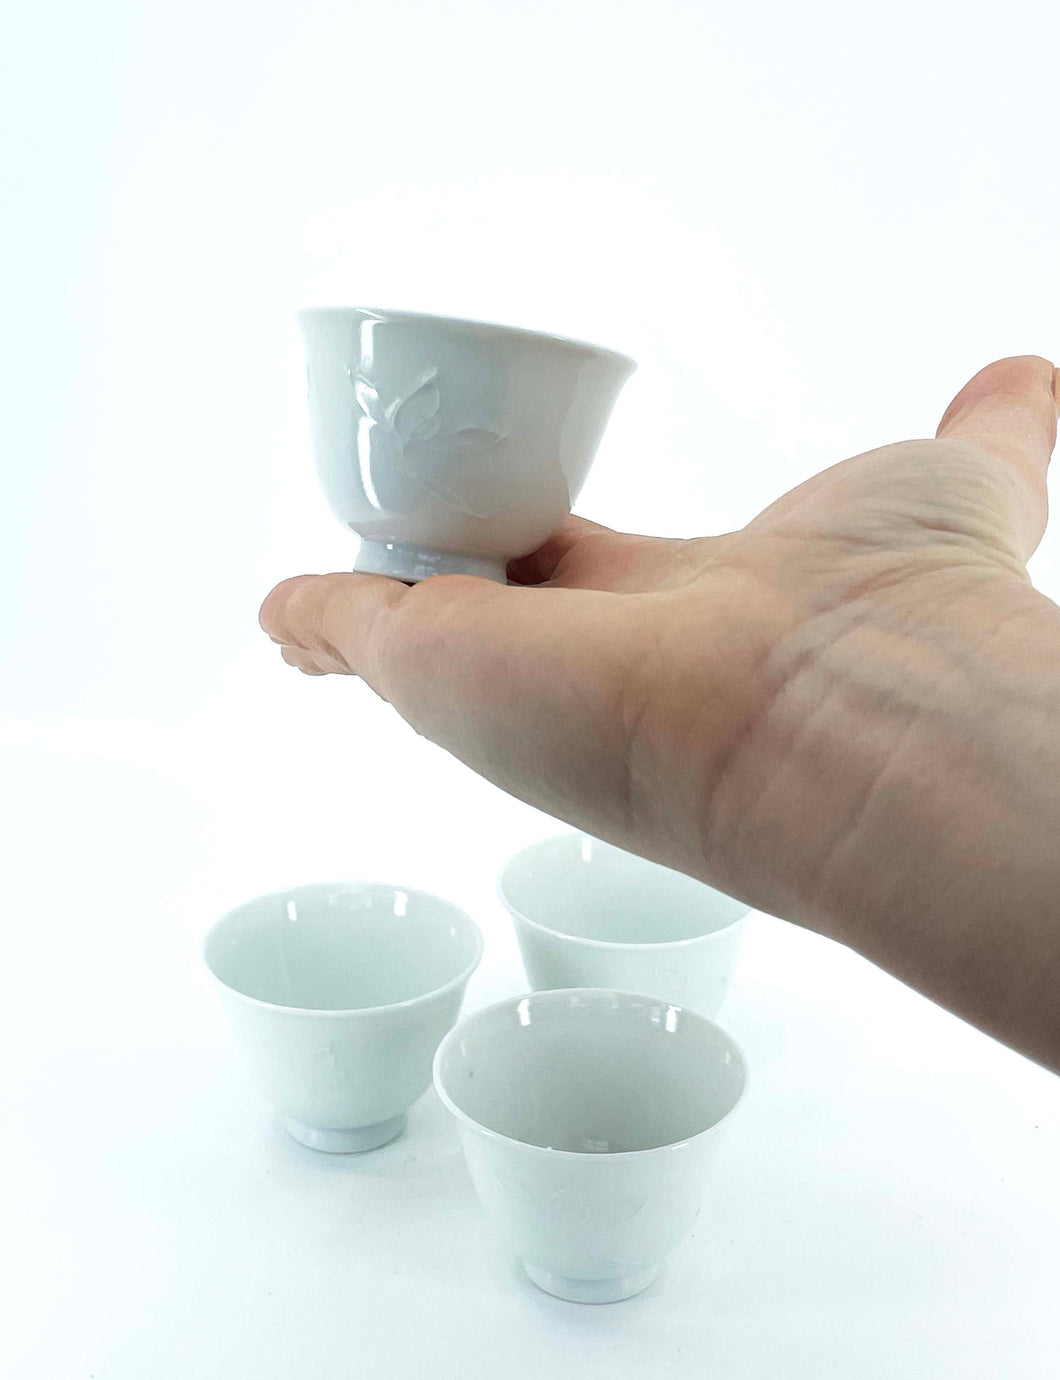 Pale blue porcelain ochoko cups with a delicate embossed flower design.